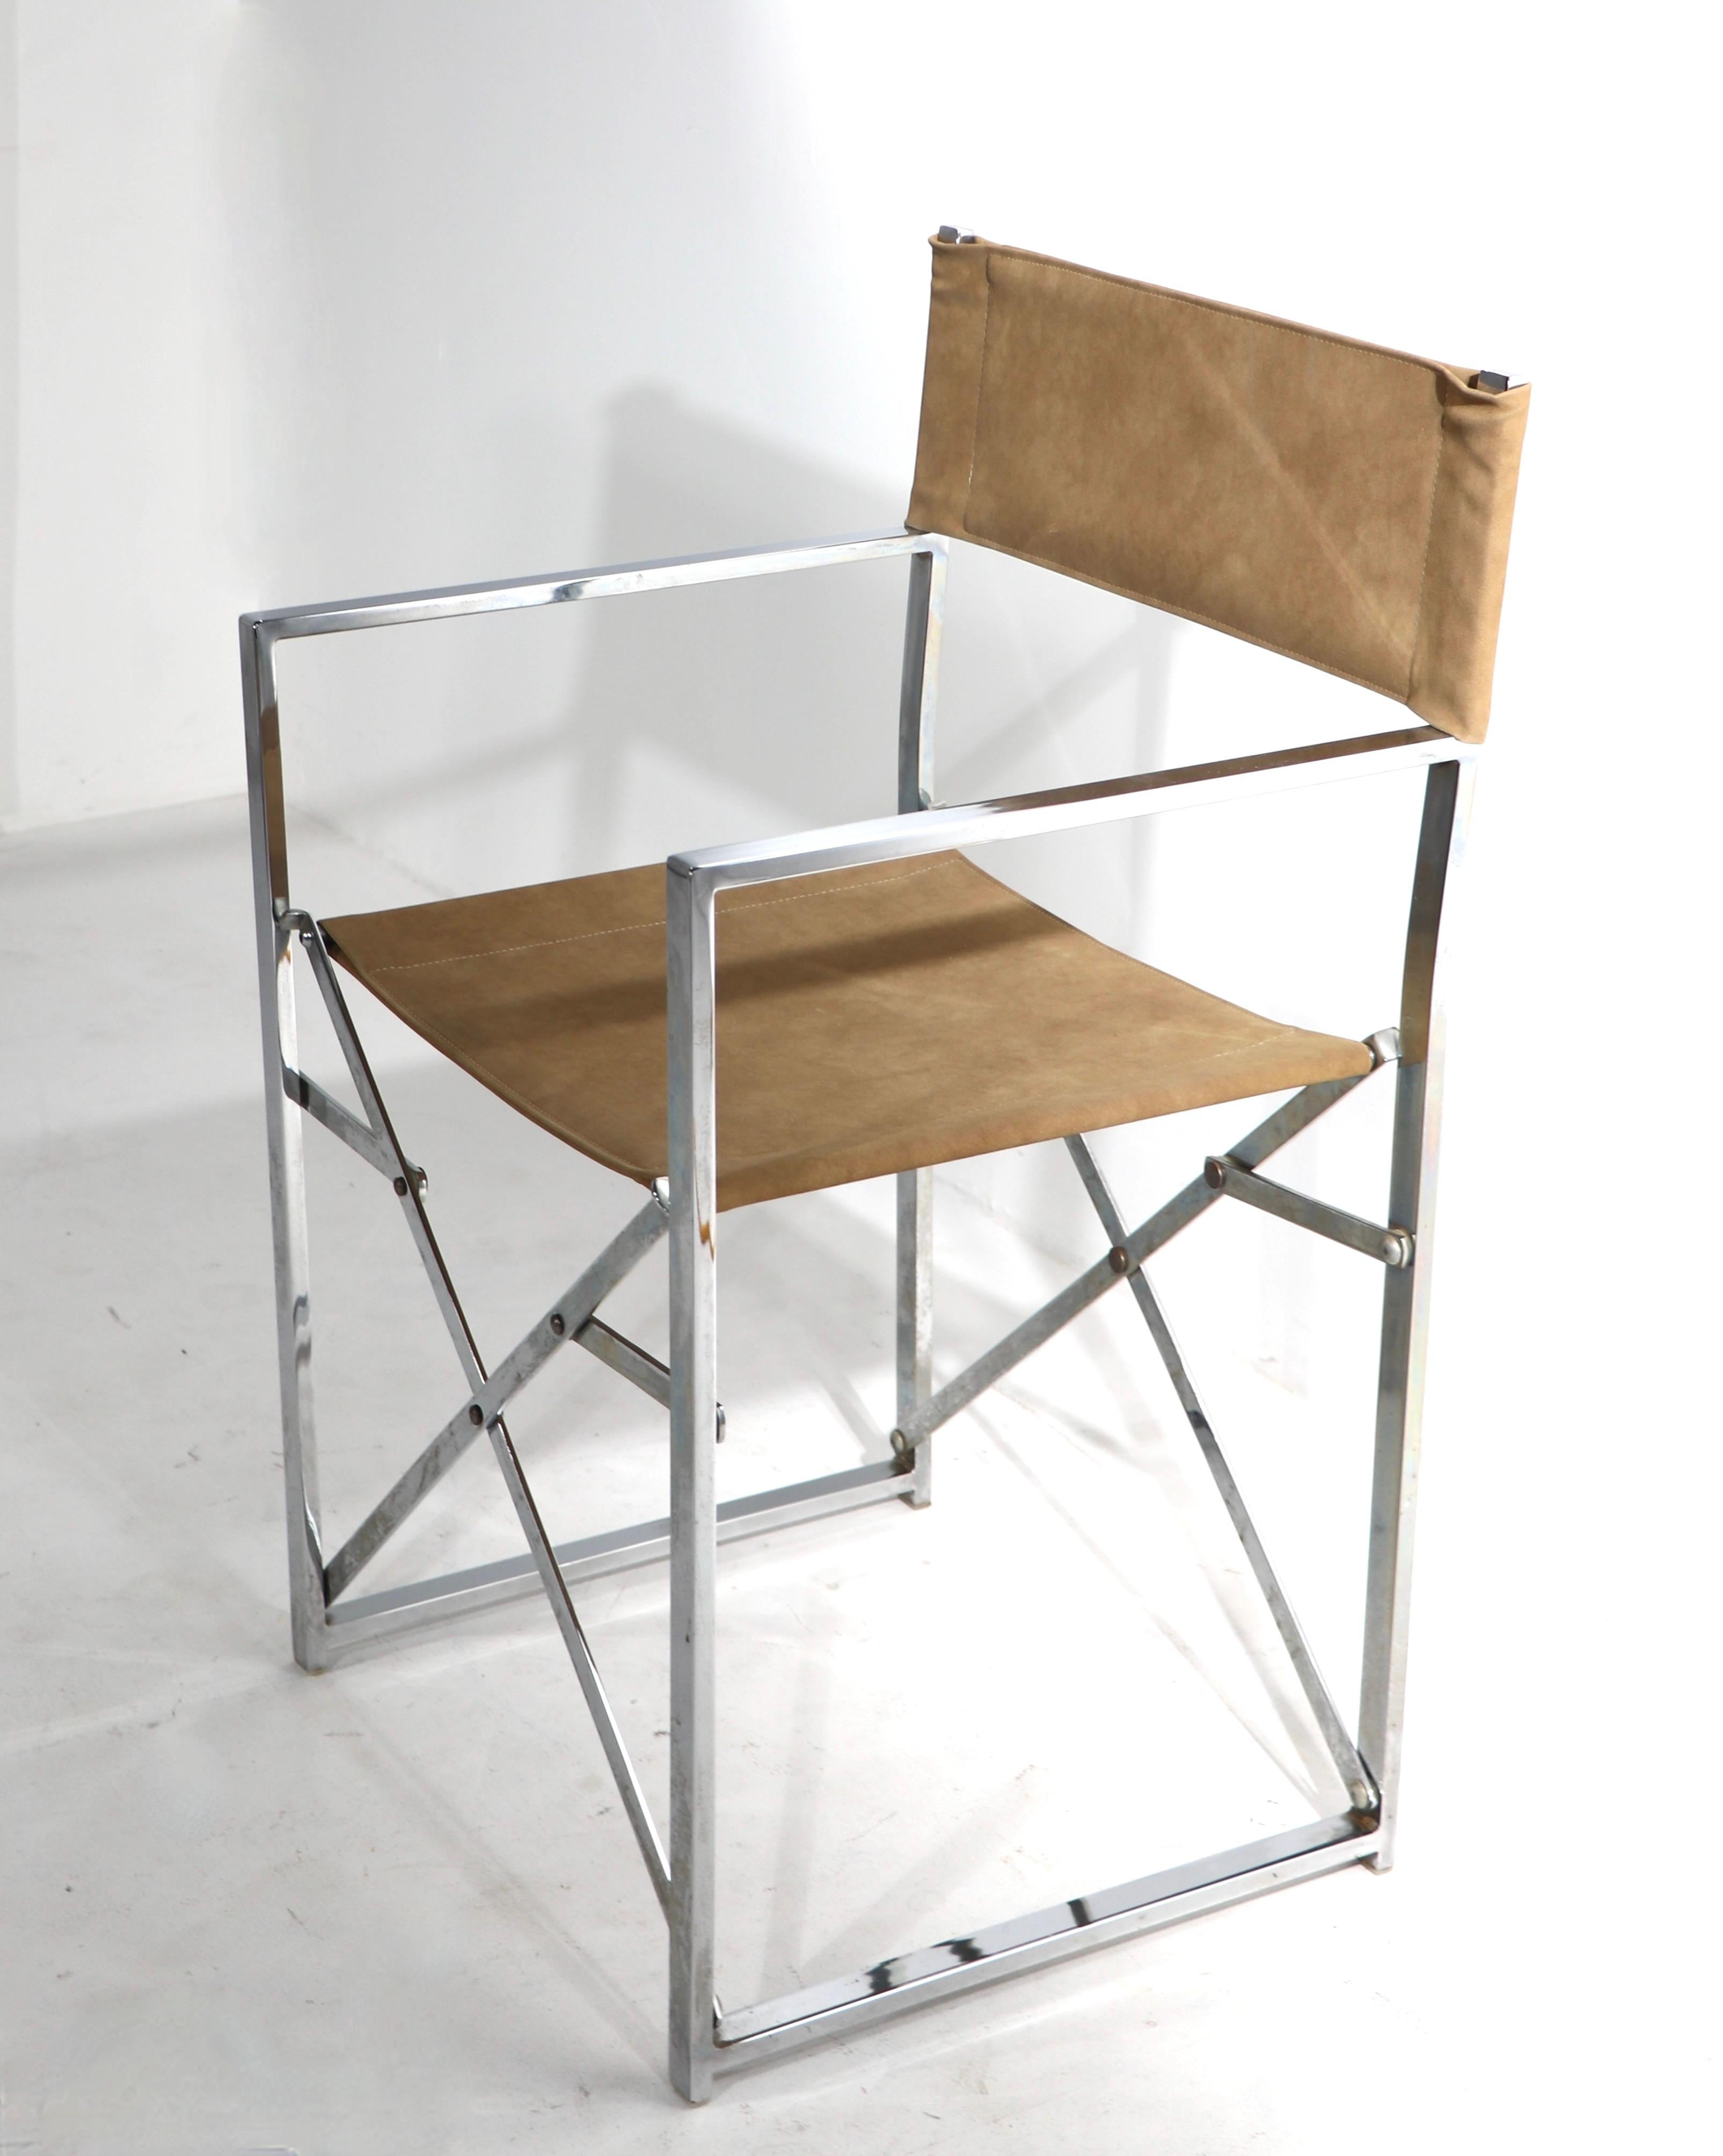 This example is unusually well crafted, having seamless weld construction, extra structural support struts and an ultra suede seat and back. Attributed to Alessandro Albrizzi, in the style of Milo Baughman. Crisp and clean, ready to use condition.